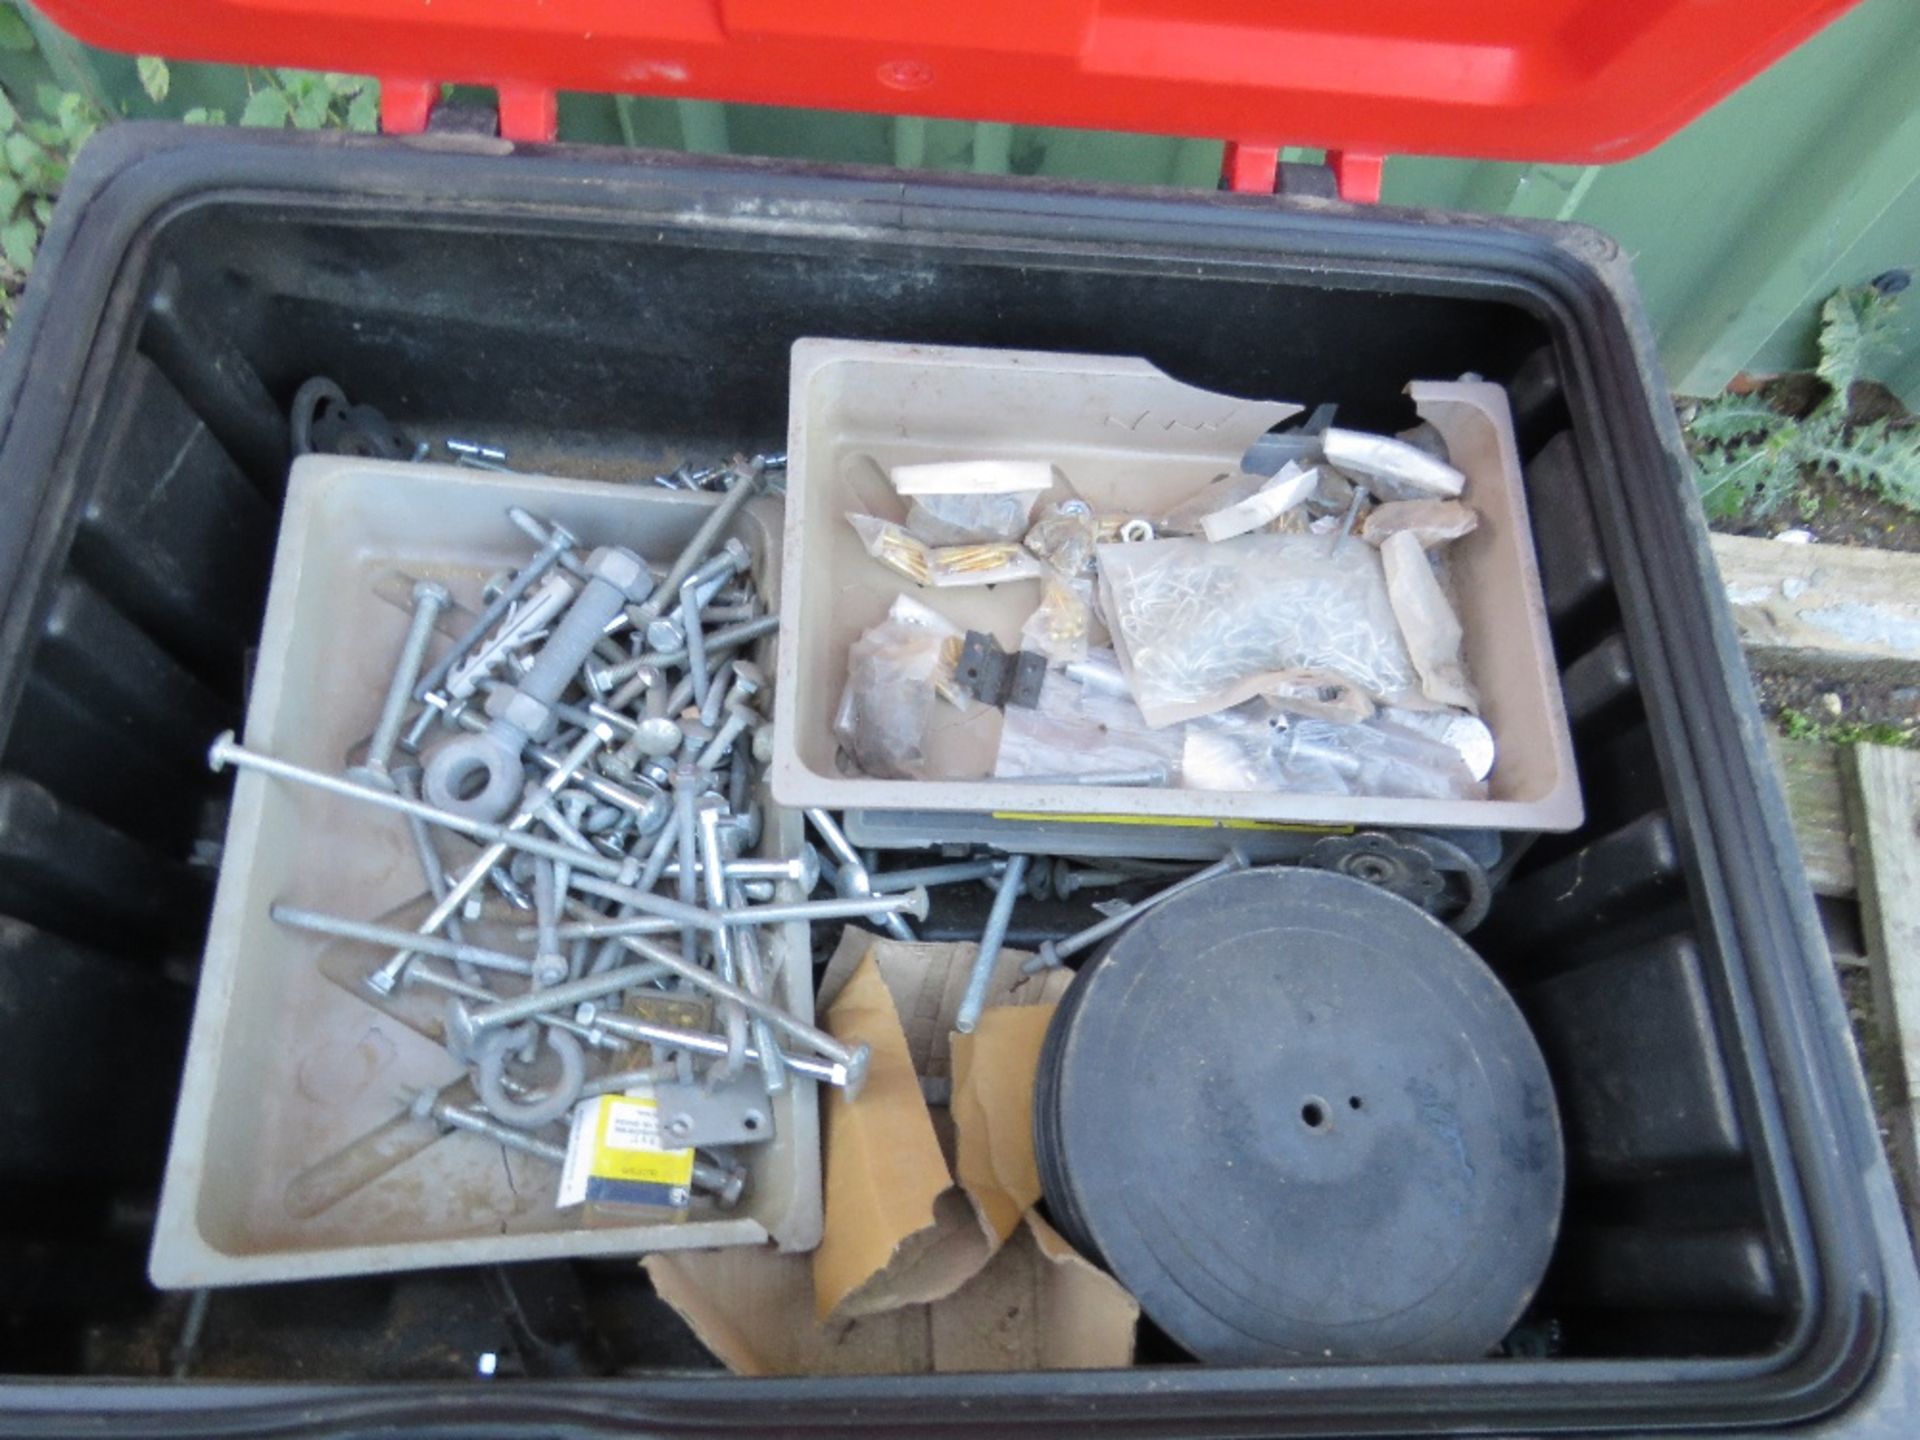 2 X TOOL BOXES/FIRE EXTINGUISHER BOXES WITH ASSORTED FIXINGS, BOLTS ETC. - Image 2 of 2